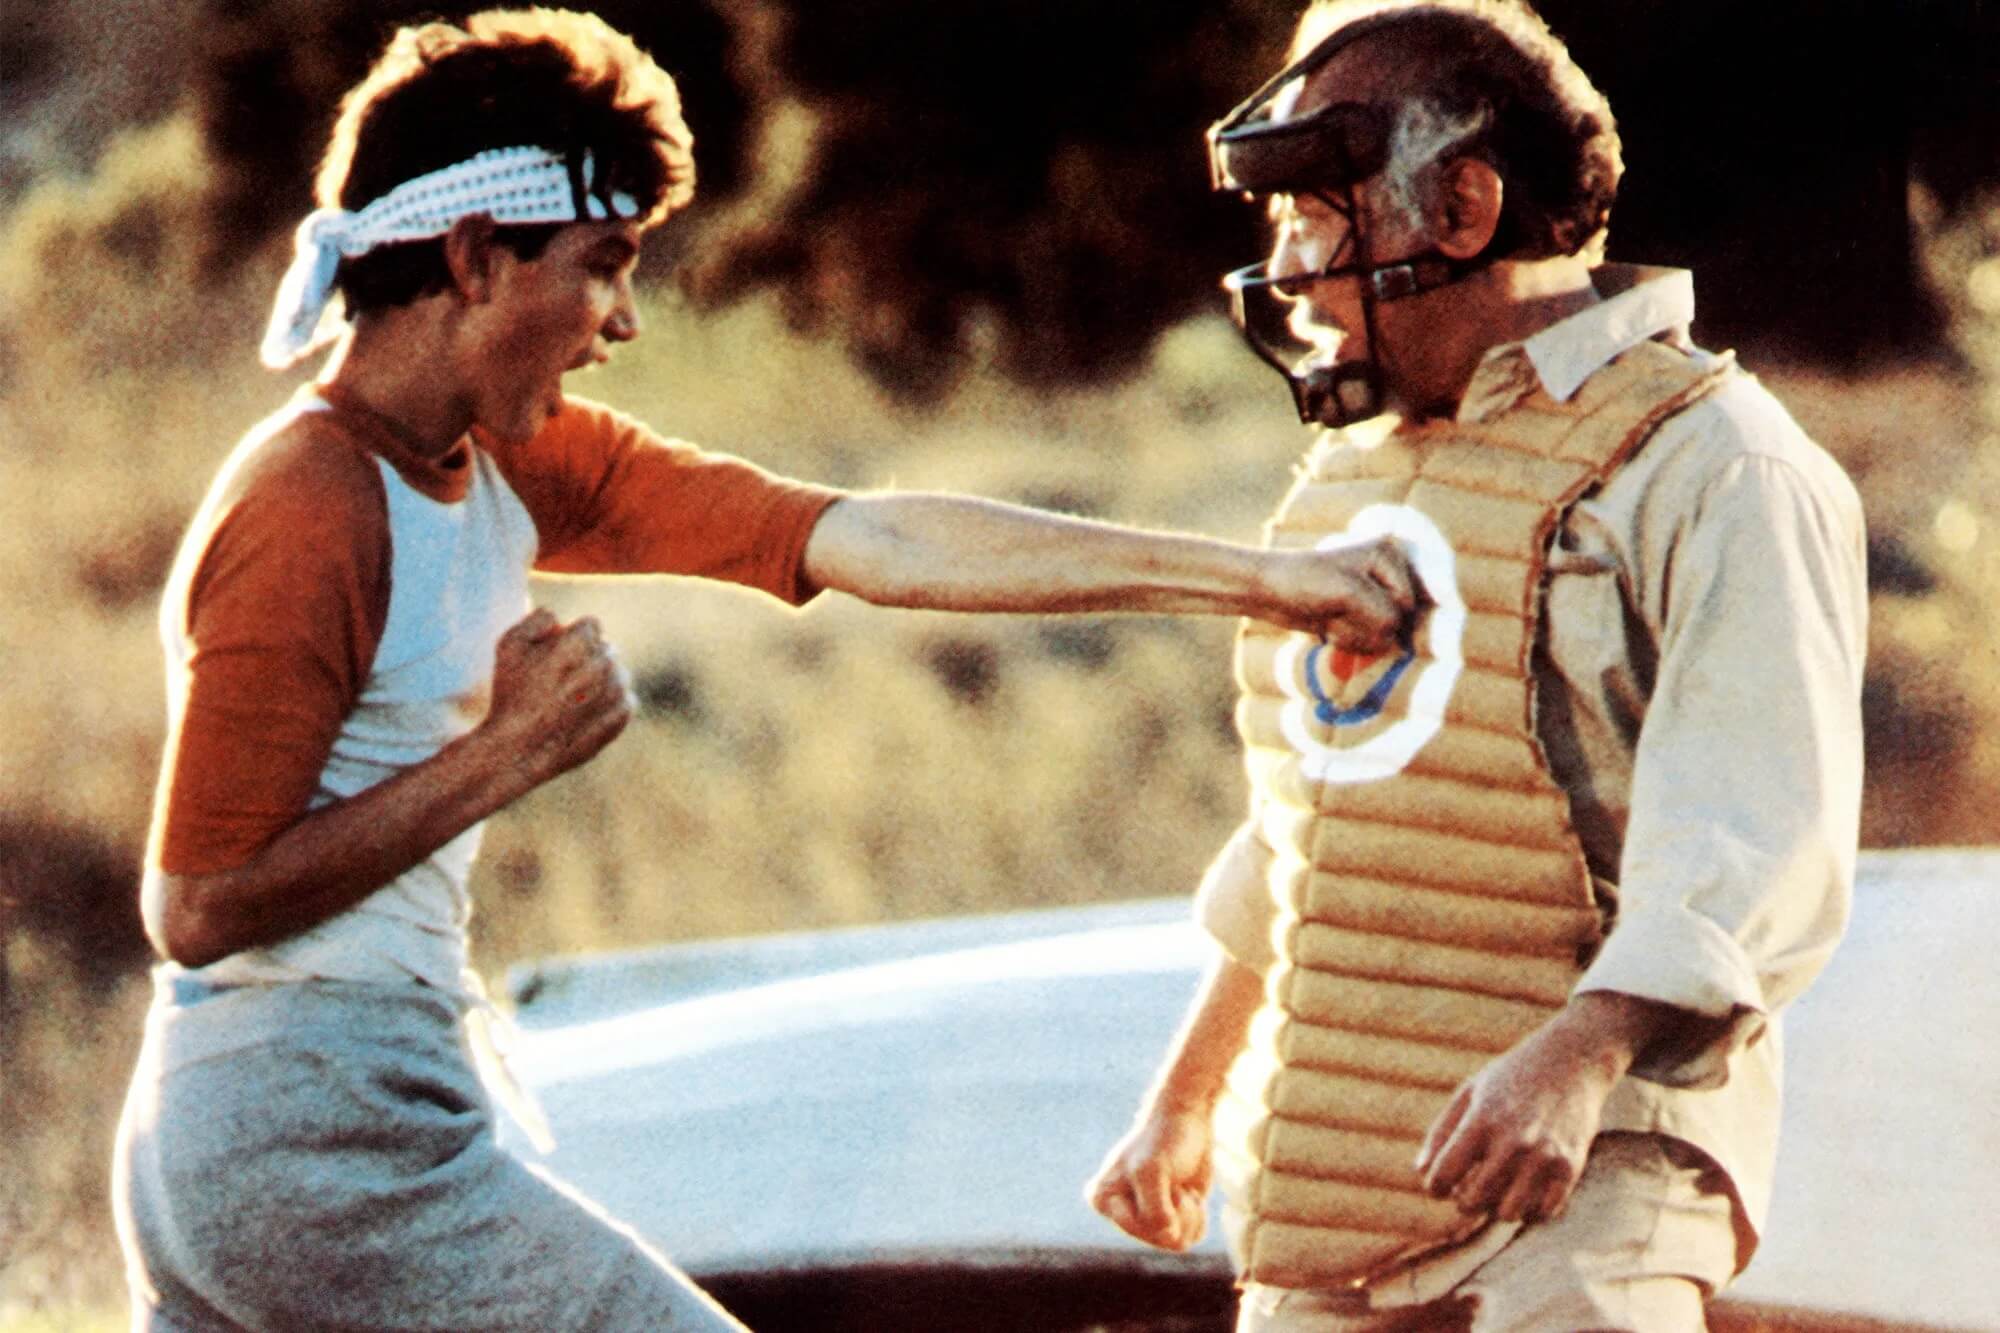 Karate Kid remake announced at Sony